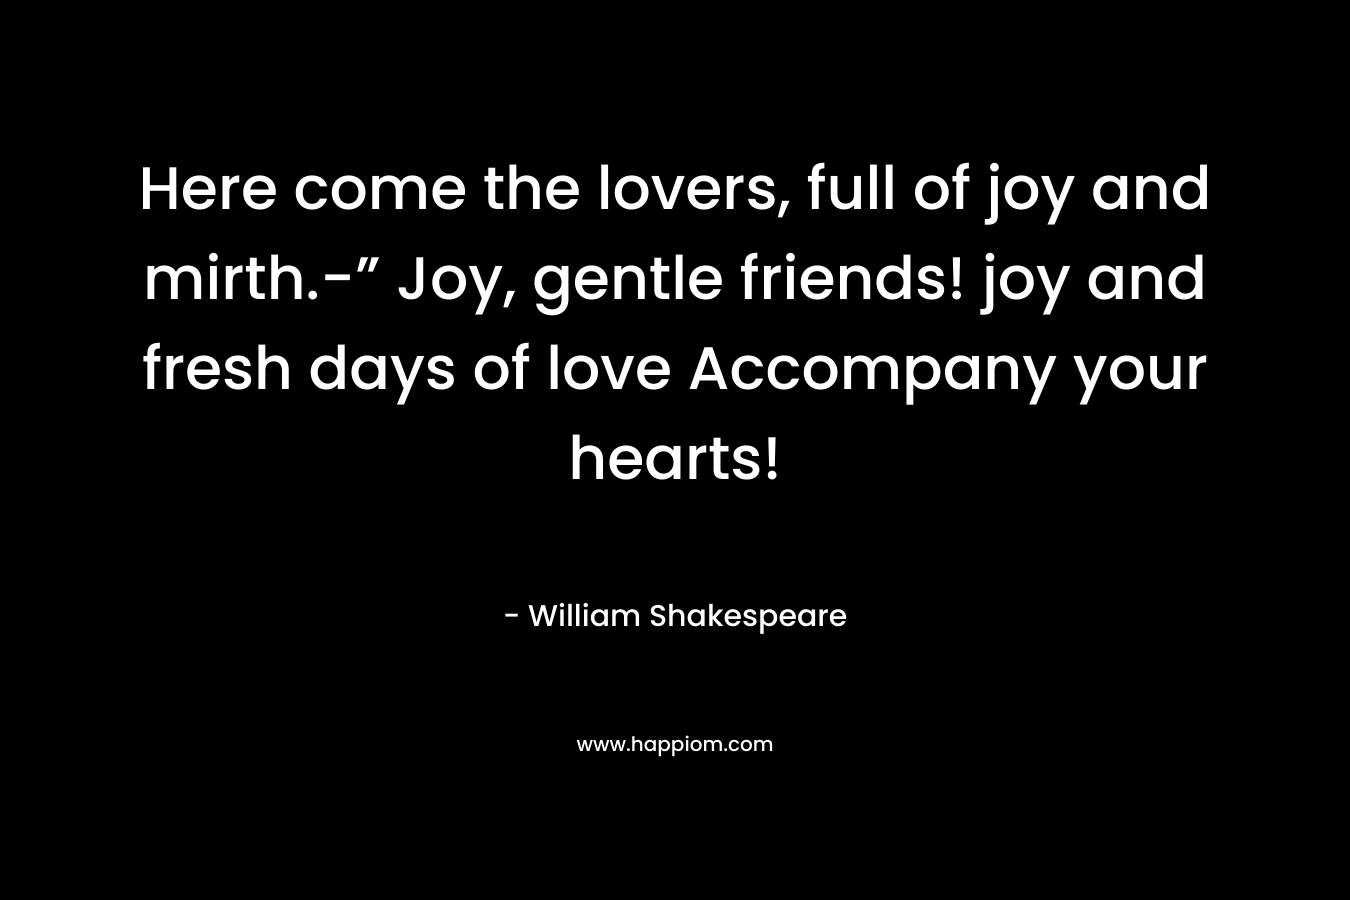 Here come the lovers, full of joy and mirth.-” Joy, gentle friends! joy and fresh days of love Accompany your hearts! – William Shakespeare